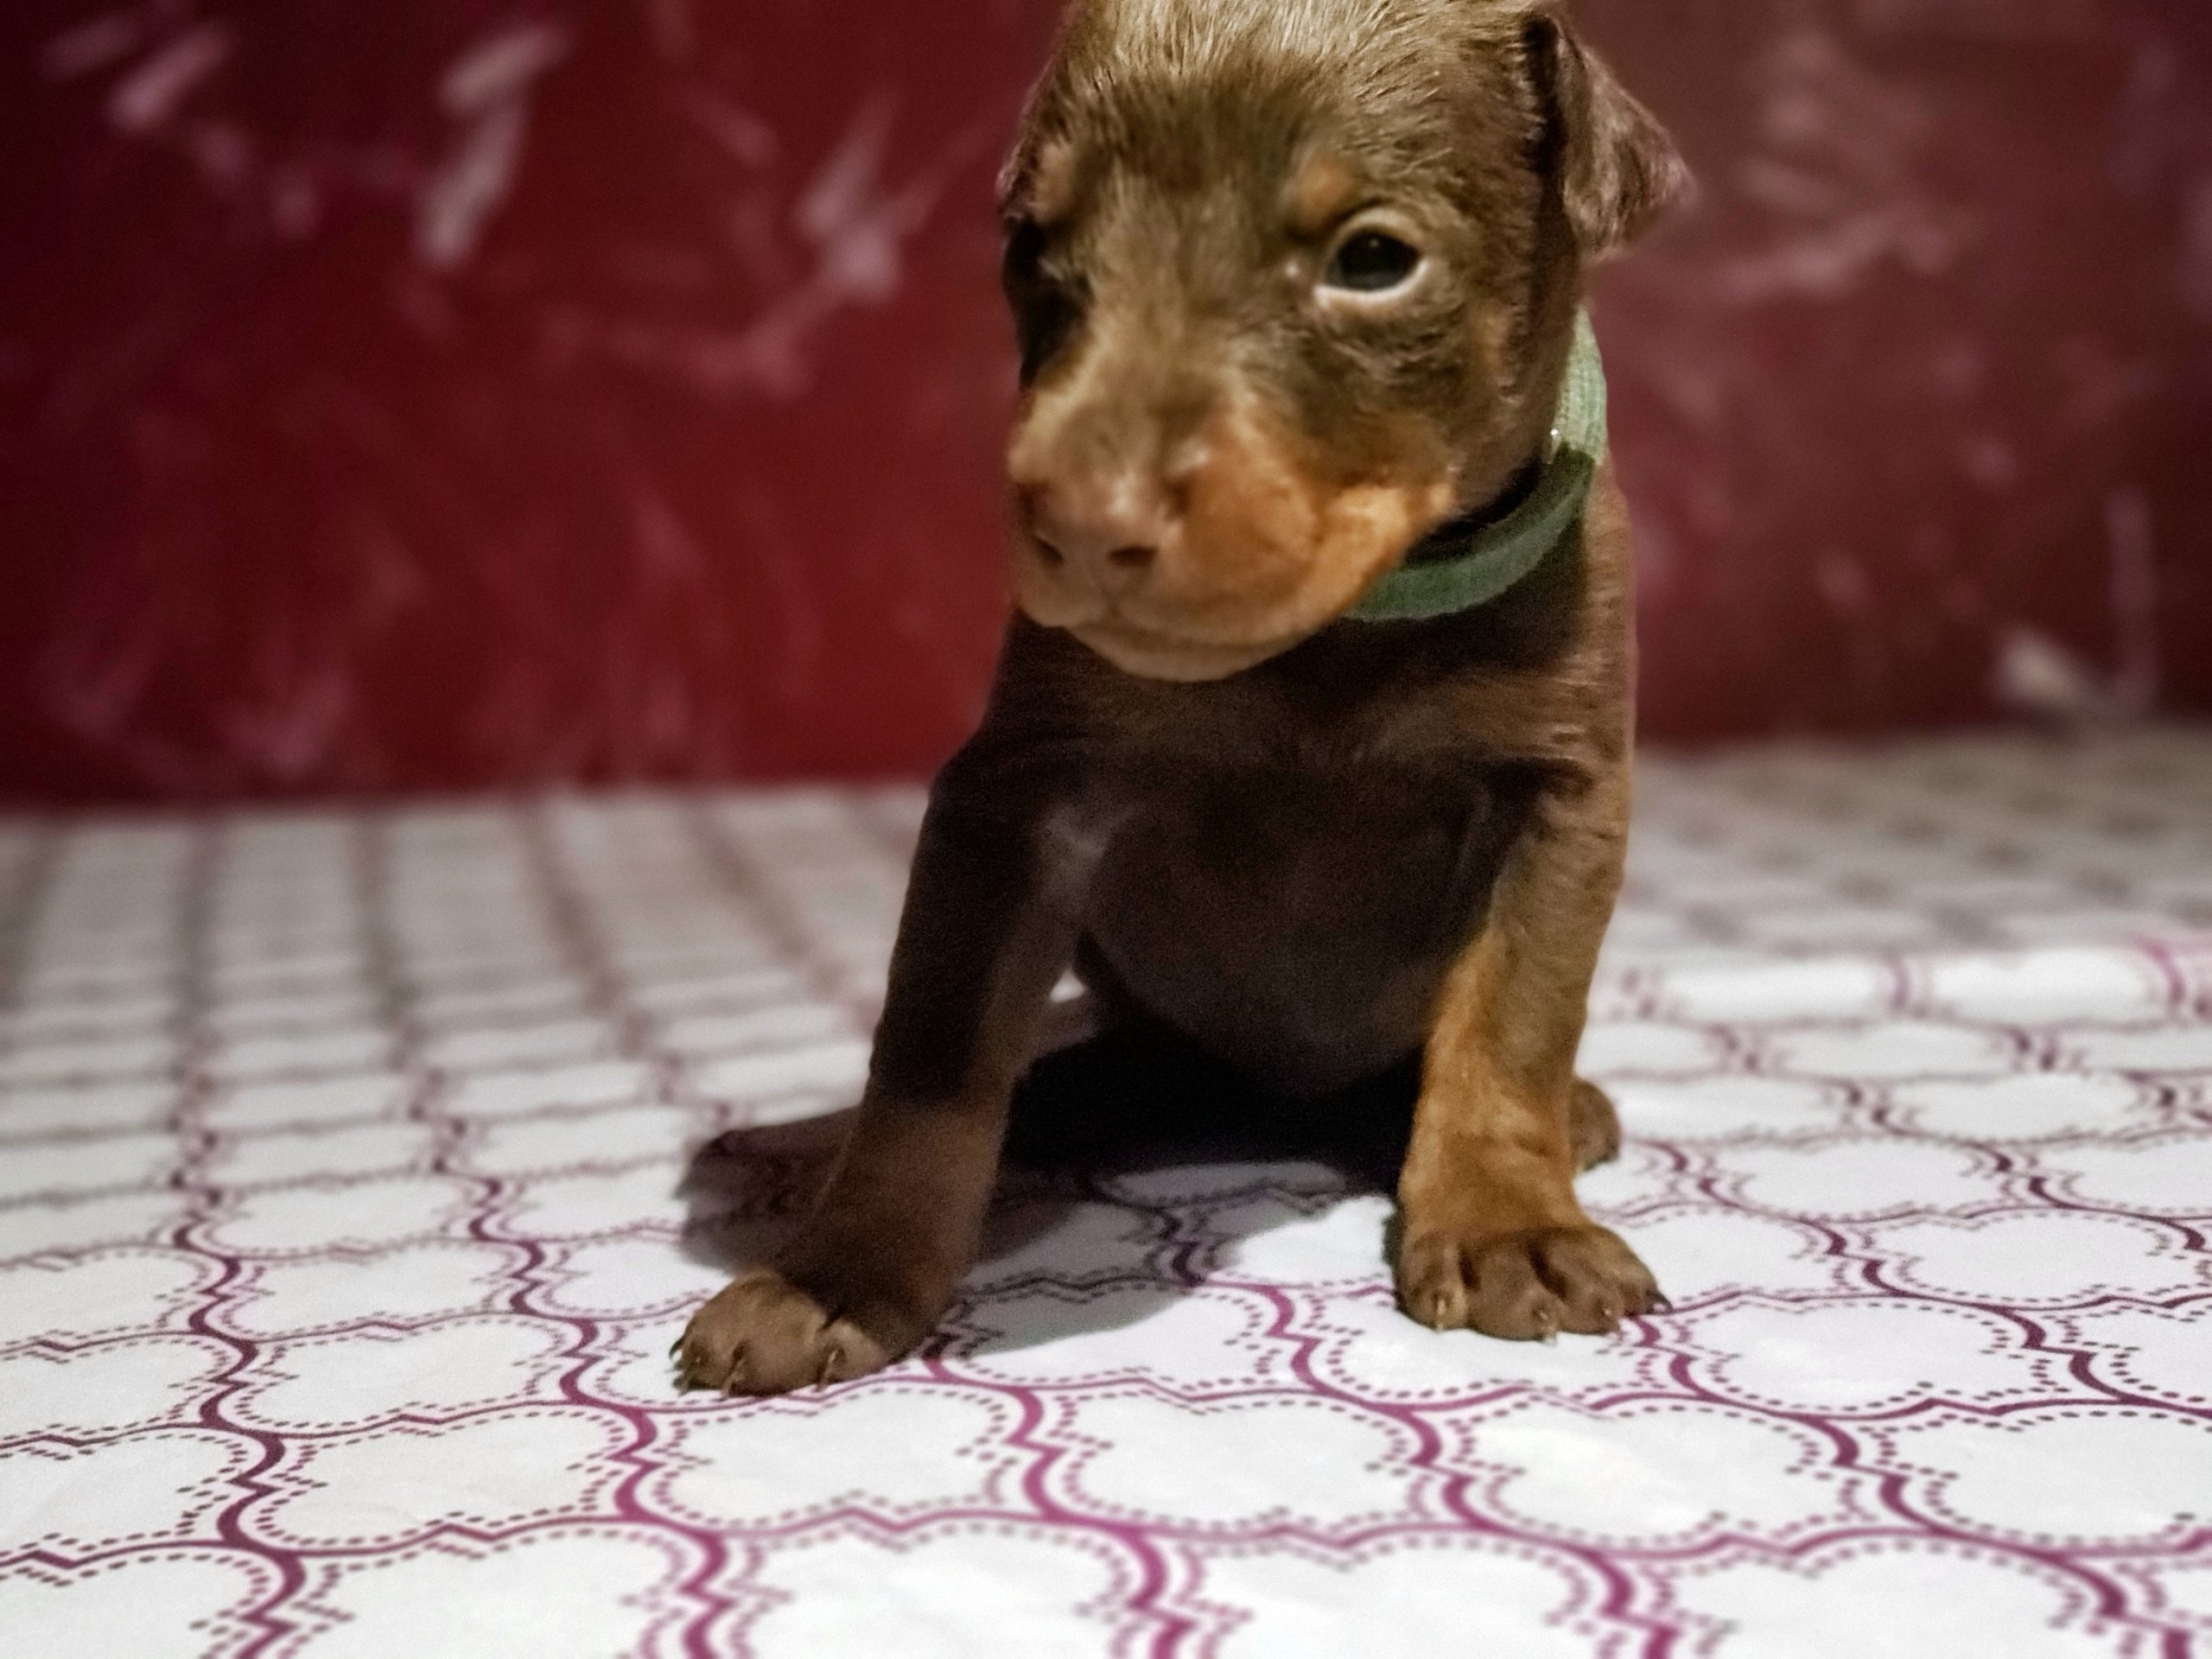 three-week-old puppy looking at the camera